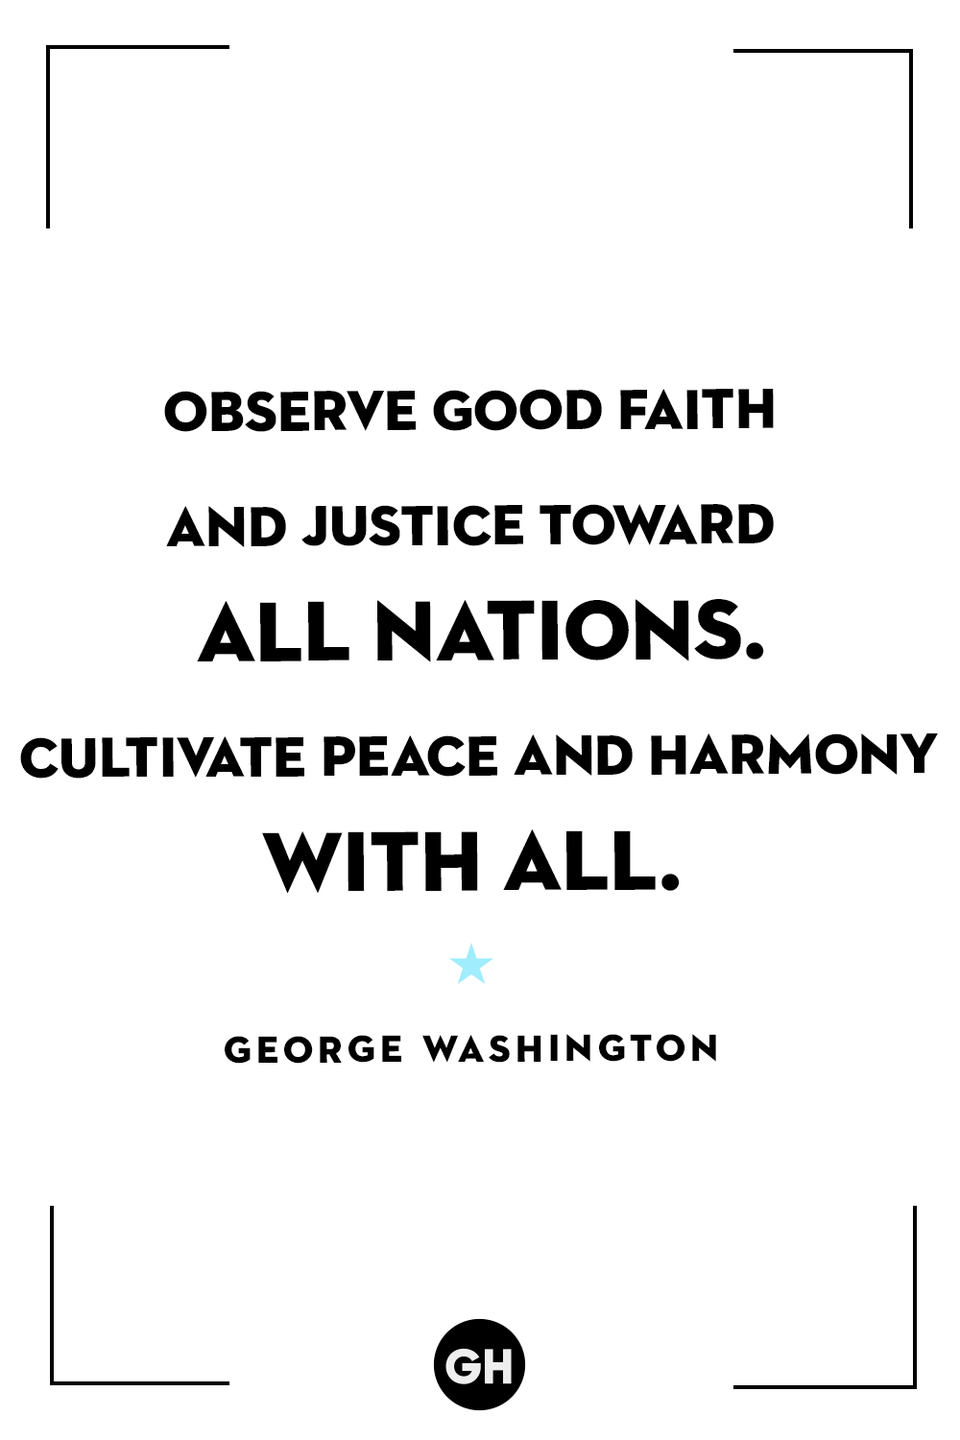 <p>Observe good faith and justice toward all nations. Cultivate peace and harmony with all.</p>